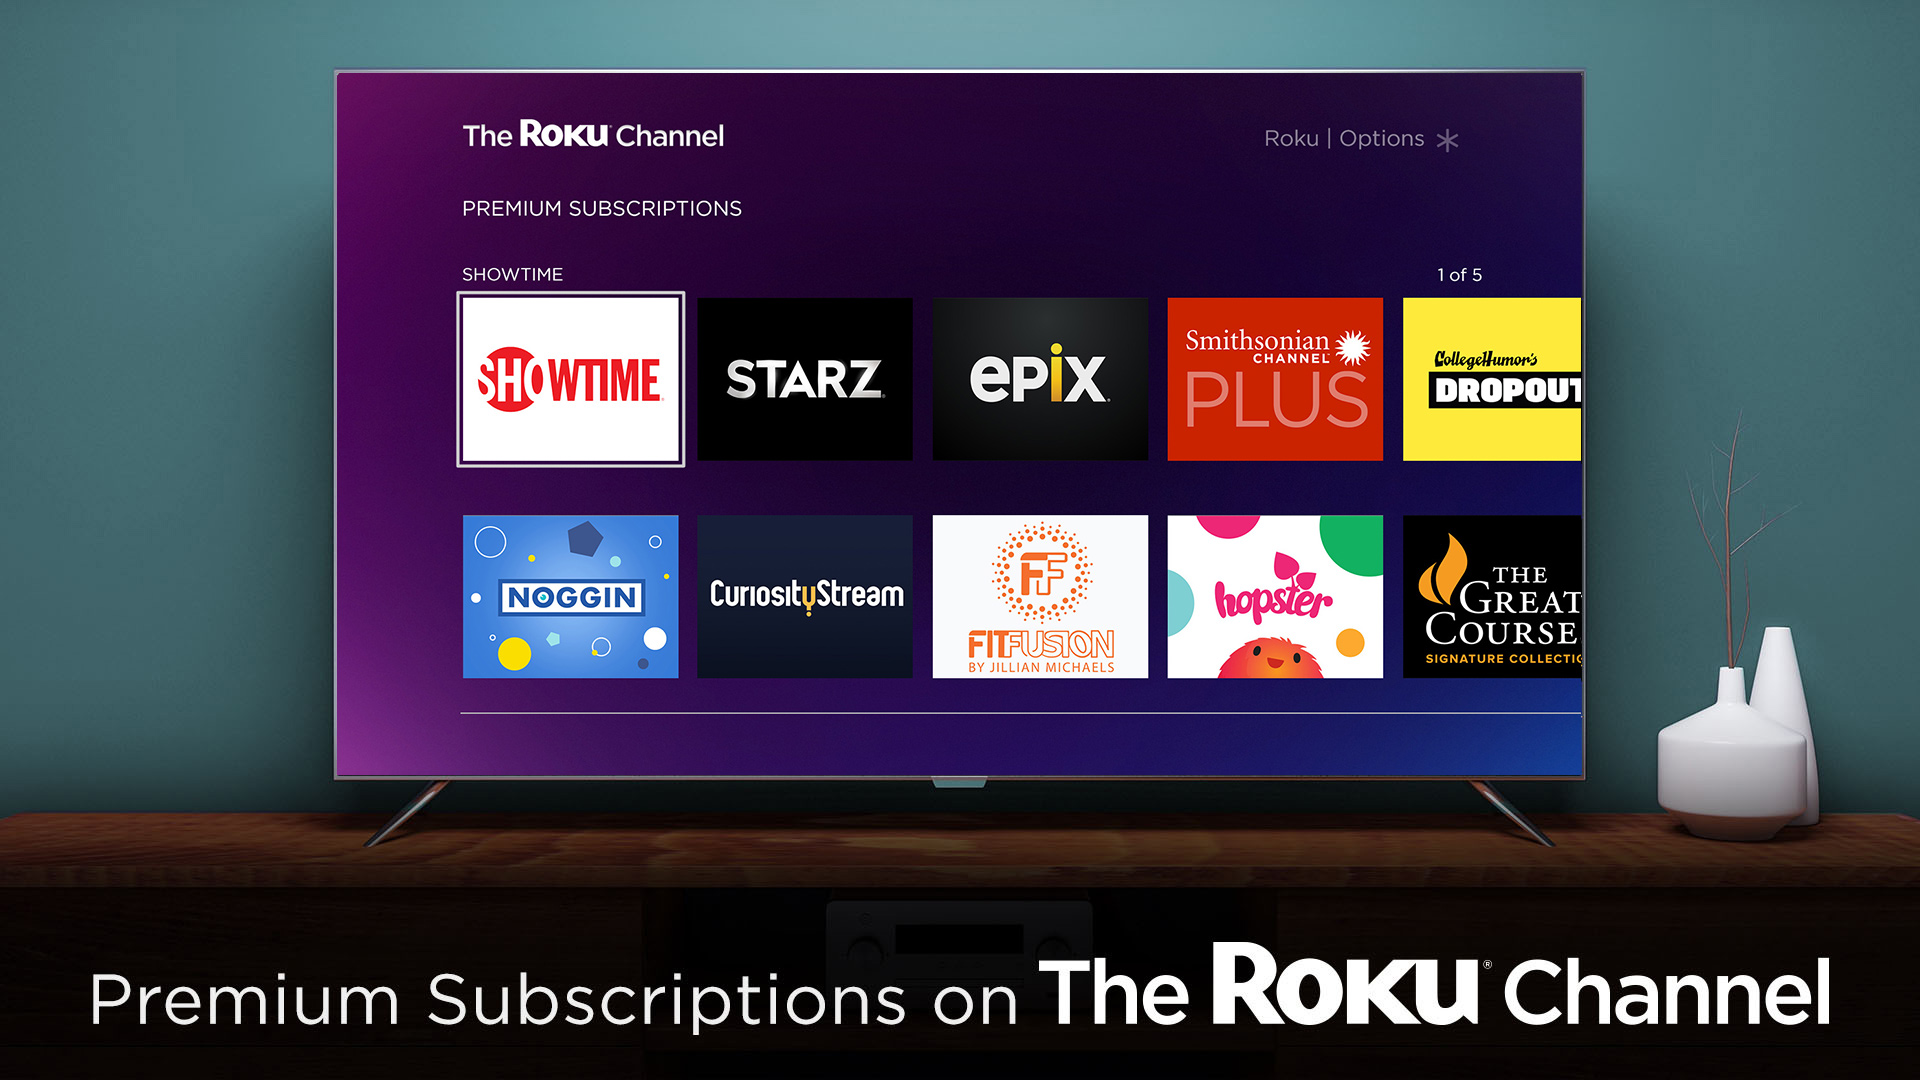 Roku is Giving Away Extended 30-Day Free Trials of Showtime, Epix, & Starz (Limited Time Deal)